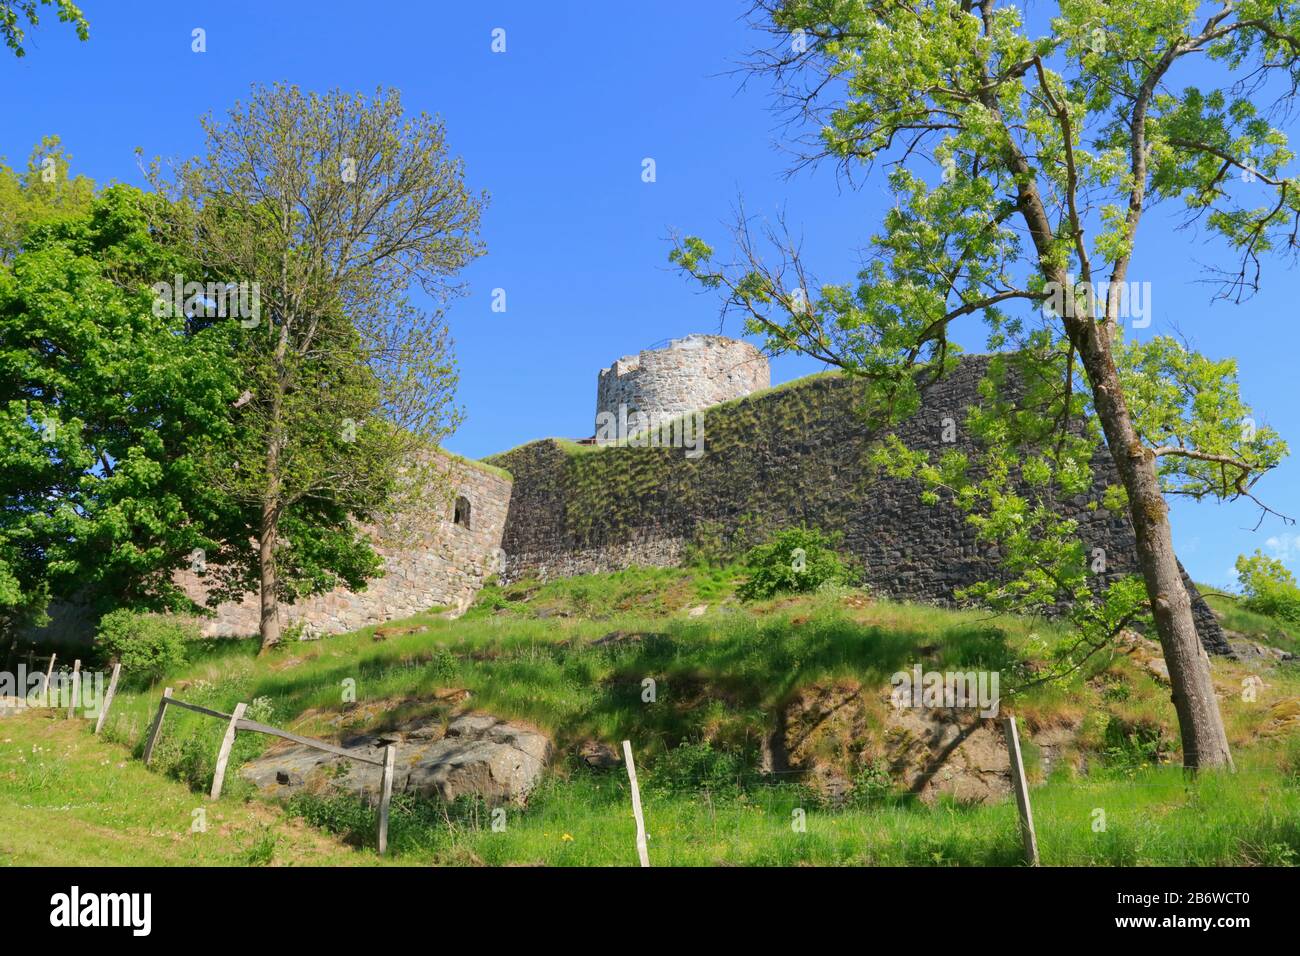 Facade of the 700 year old Bohus Fortress in Kungälv, Sweden. The building is owned by the Swedish National Property Board (Statens Fastighetsverk). Stock Photo